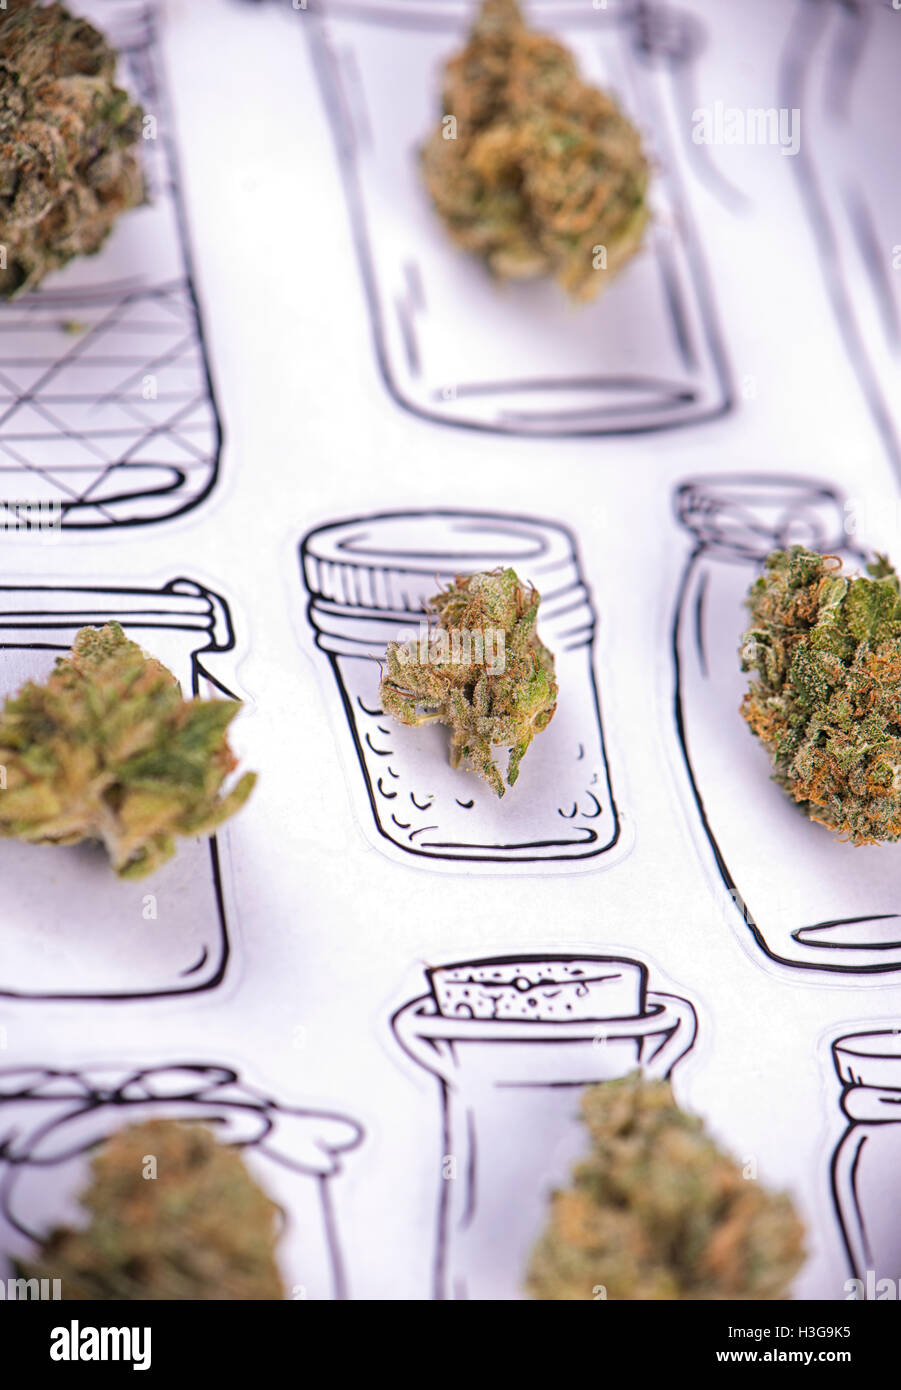 Dried cannabis (marijuana) buds pattern over a jar drawing on white paper Stock Photo